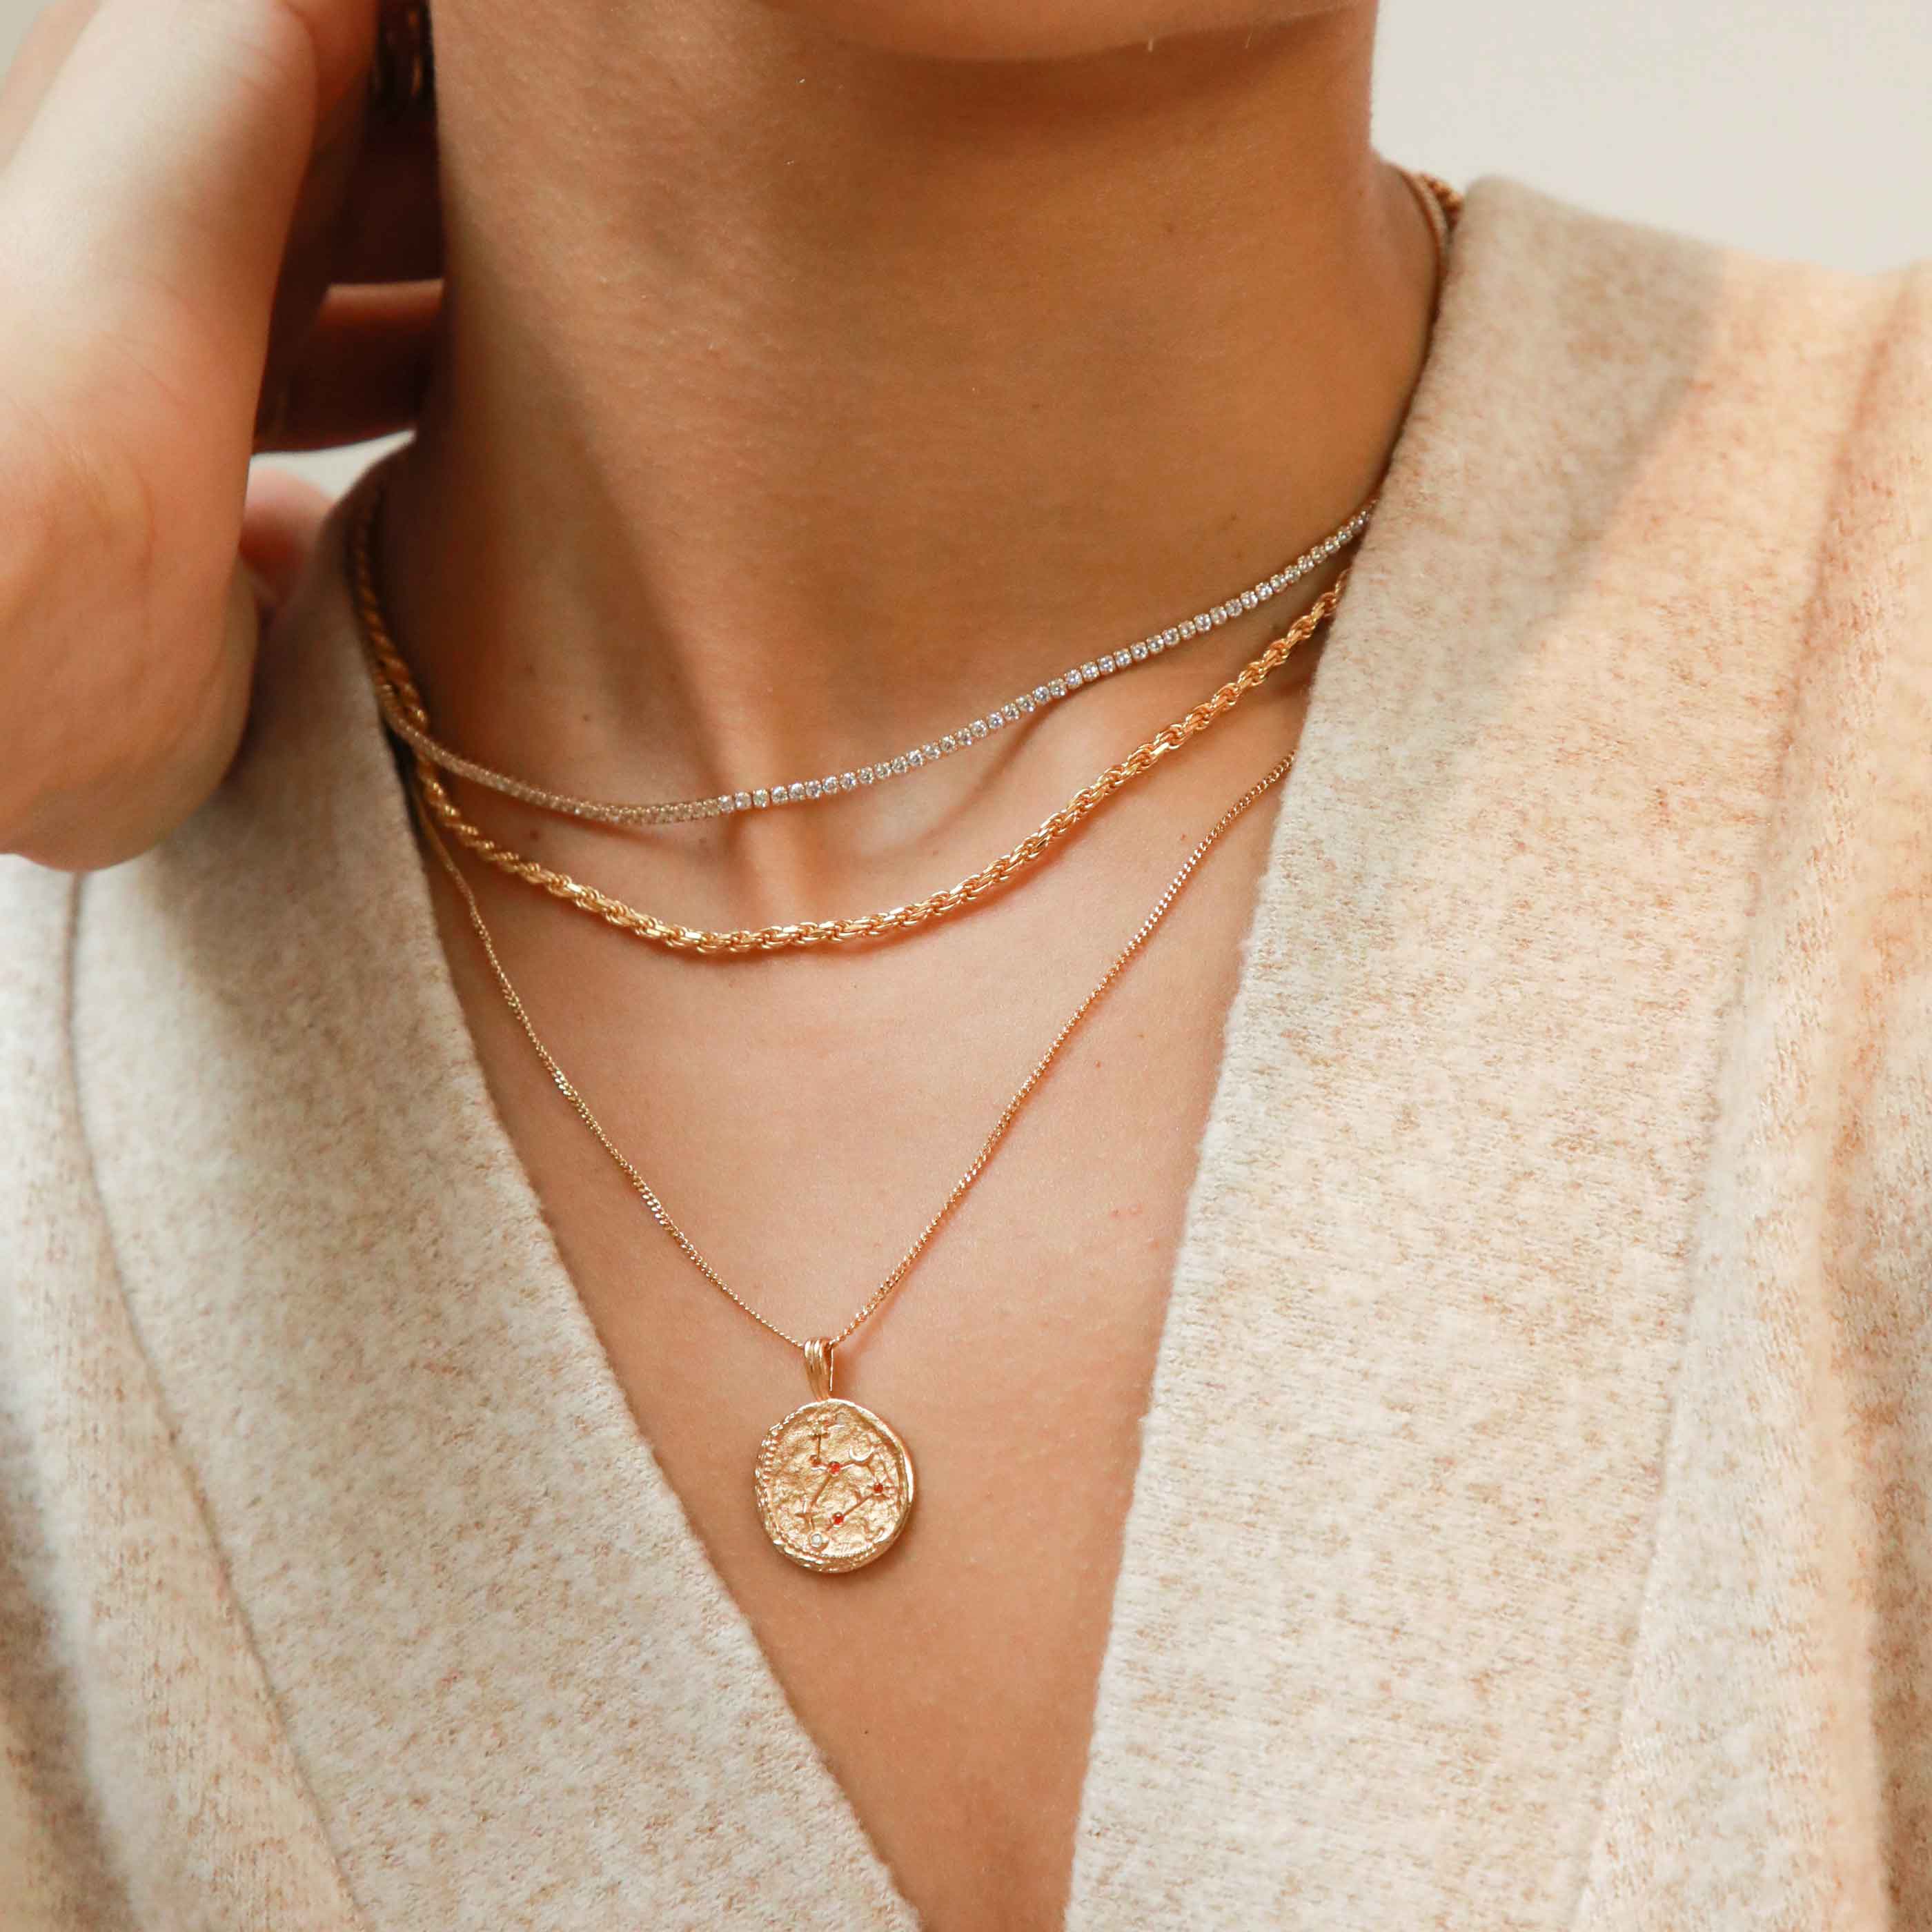 Tennis Chain Necklace in Gold layered with bold rope chain and zodiac pendant necklace